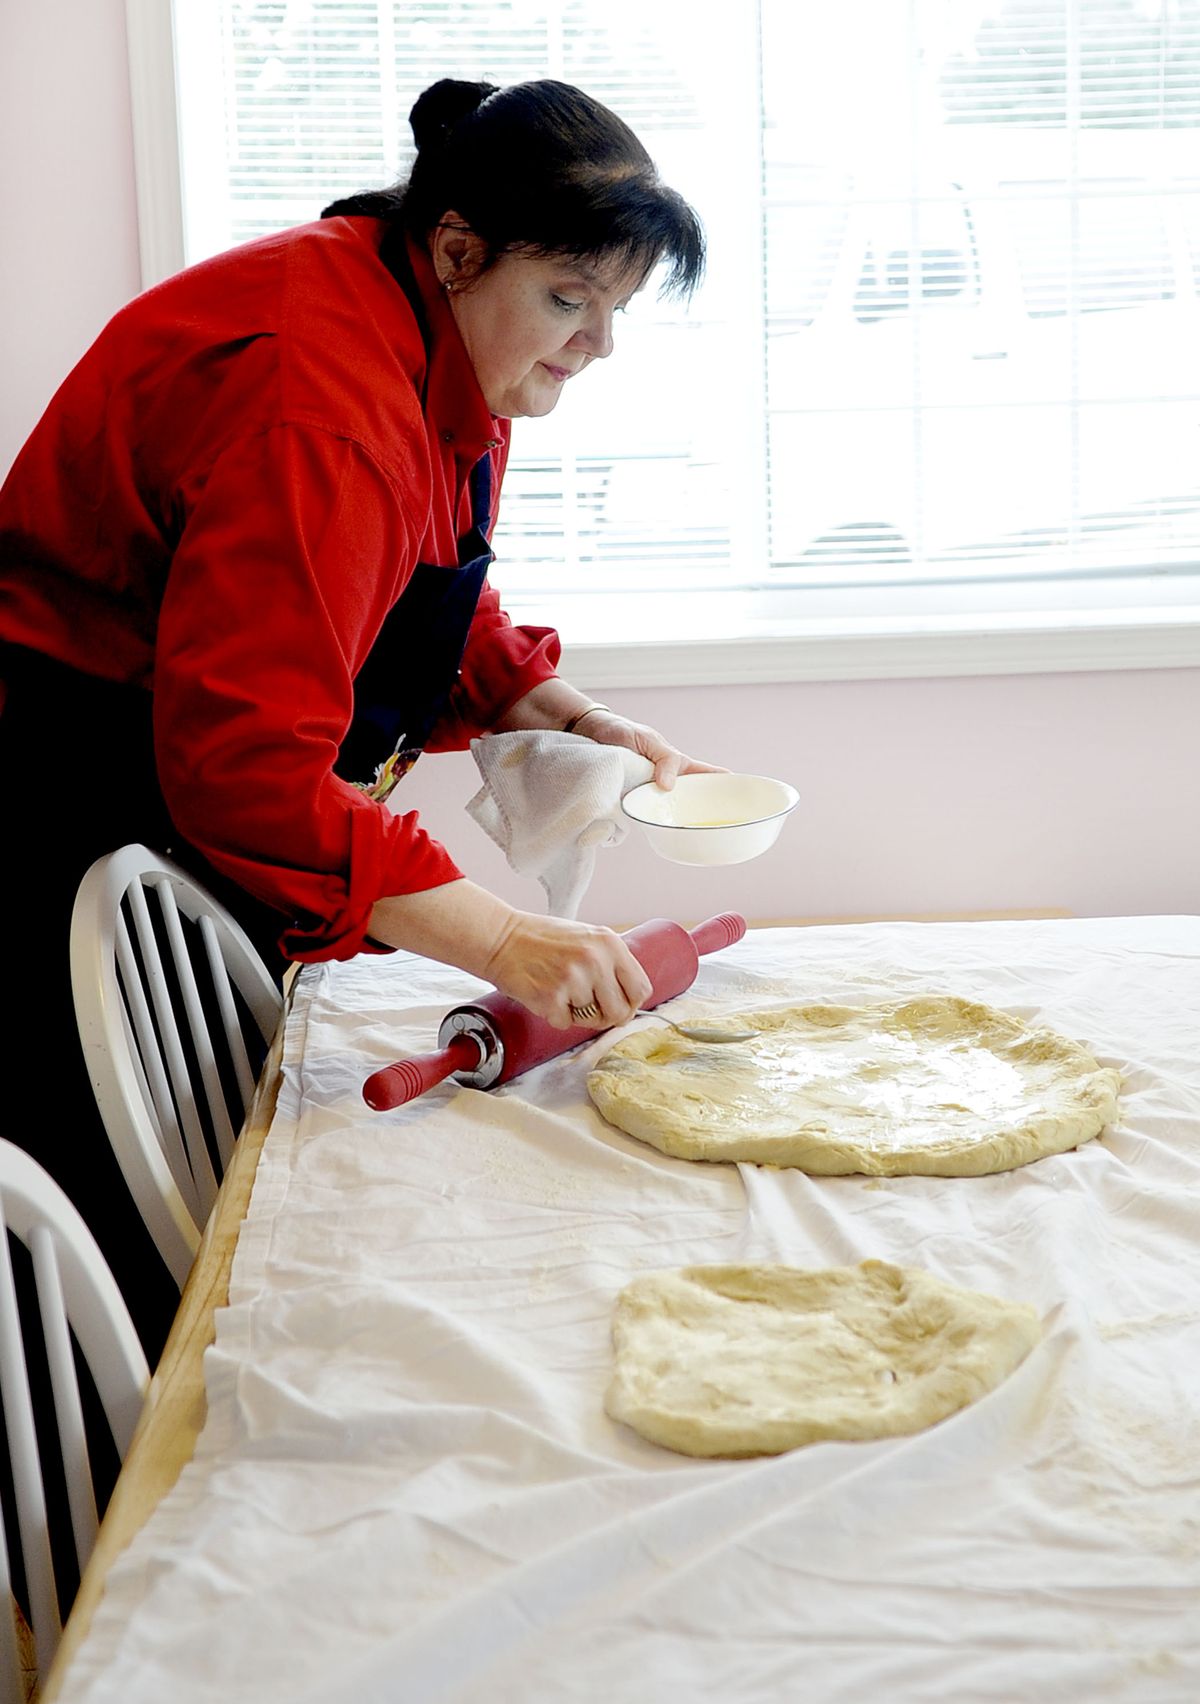 Karen Hood prepares the dough for her Eastern European walnut roll at her Greenacres home. Hood’s holiday-themed cookbook “Christmas Delights” is available in print and via download. (Kathy Plonka)